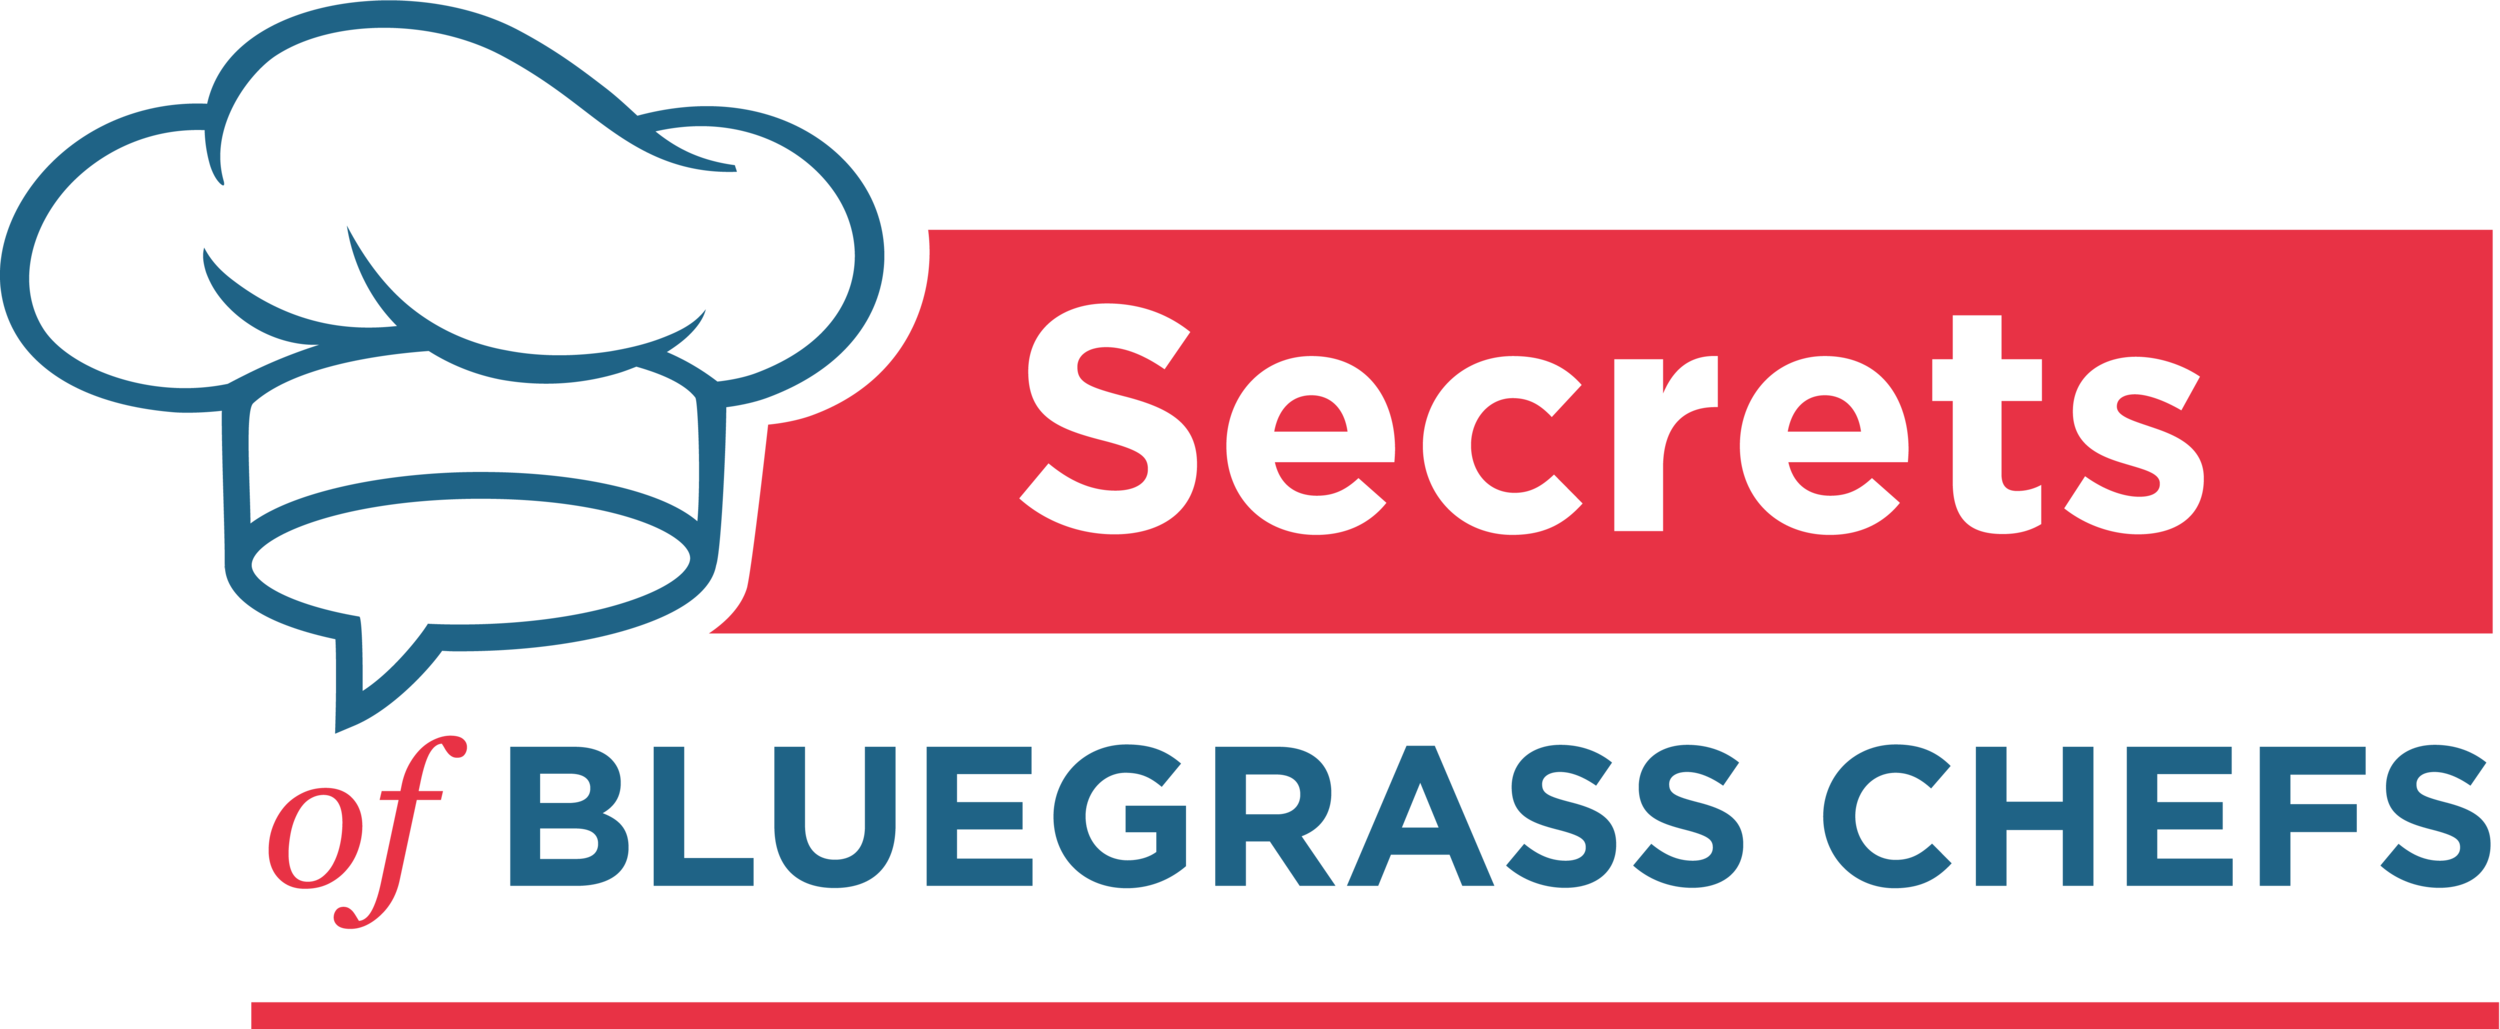 Secrets logo with white chef hat.png